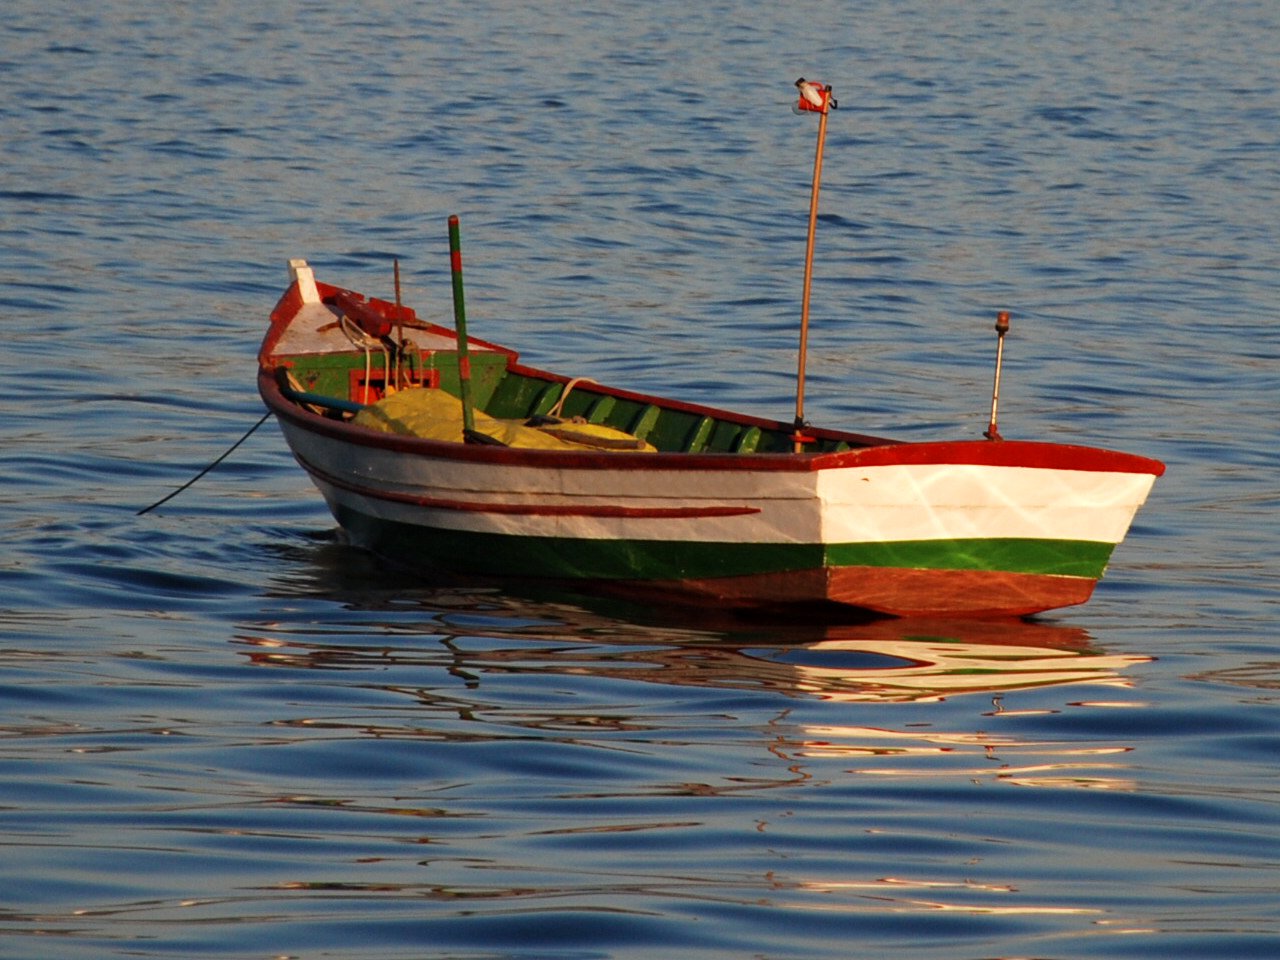 a boat in a body of water with a flag on it